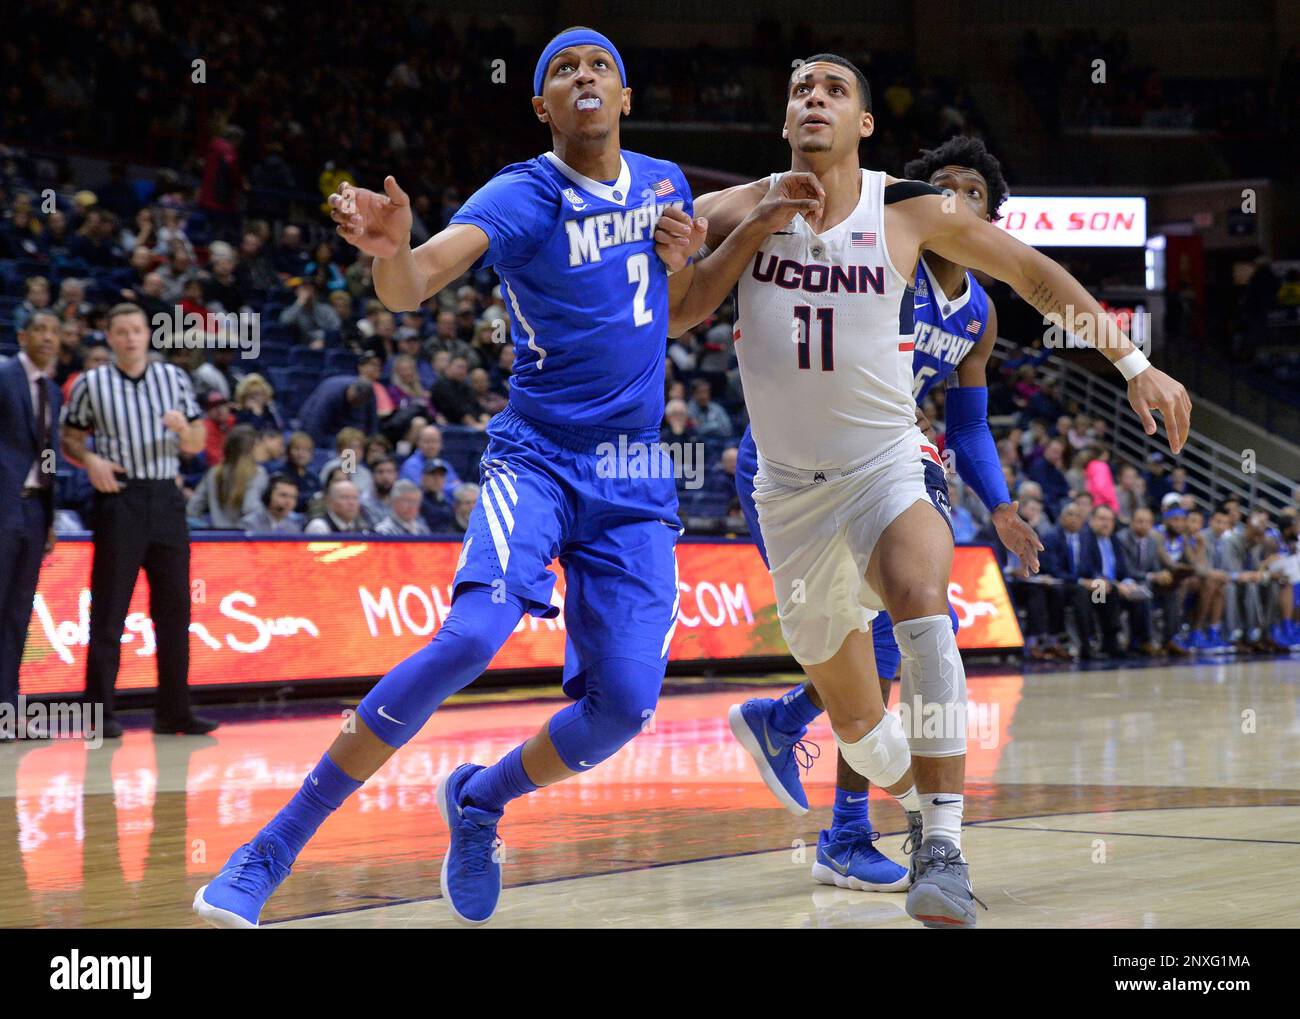 STORRS, CT - FEBRUARY 25: Memphis Tigers Guard / Forward Jimario Rivers (2)  and UConn Huskies Forward Kwintin Williams (11) battle for position in the  post during the game as the UConn